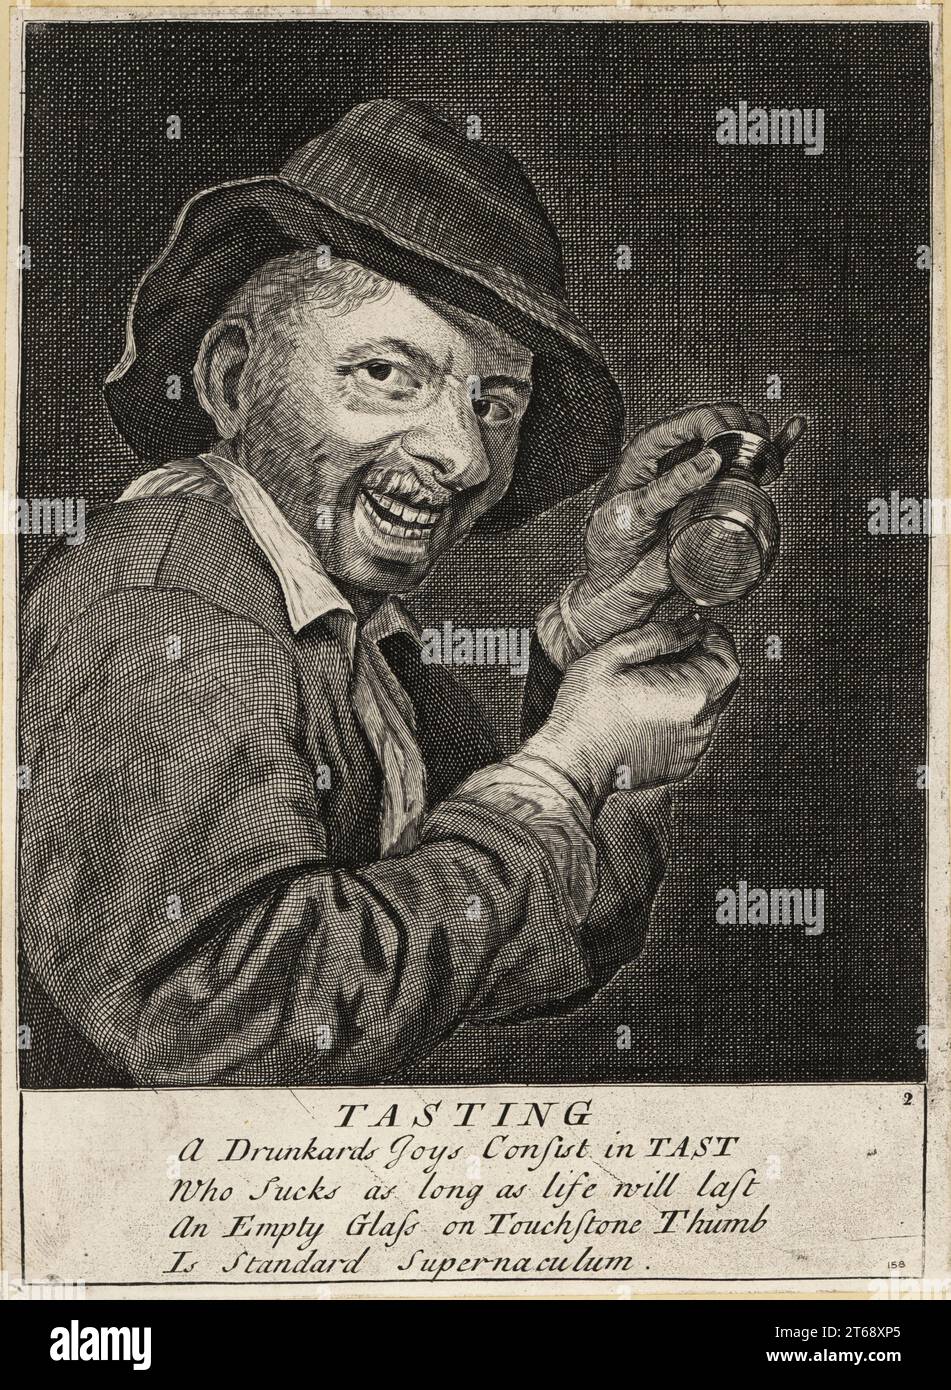 17th century English drunk playing a drinking game. He must drink more if the last drop from an empty glass covers the edge of his fingernail. Tasting. A drunkards joys consist in tast, Who sucks as long as life will last. An empty glass on touchstone thumb, Is standard supernaculum. Possibly from an original print in The merry conceited five senses, Robert Walton, 1661. Copperplate engraving by David Deuchar from A Collection of Etchings after the most Eminent Masters of the Dutch and Flemish Schools, Edinburgh, 1803. Stock Photo